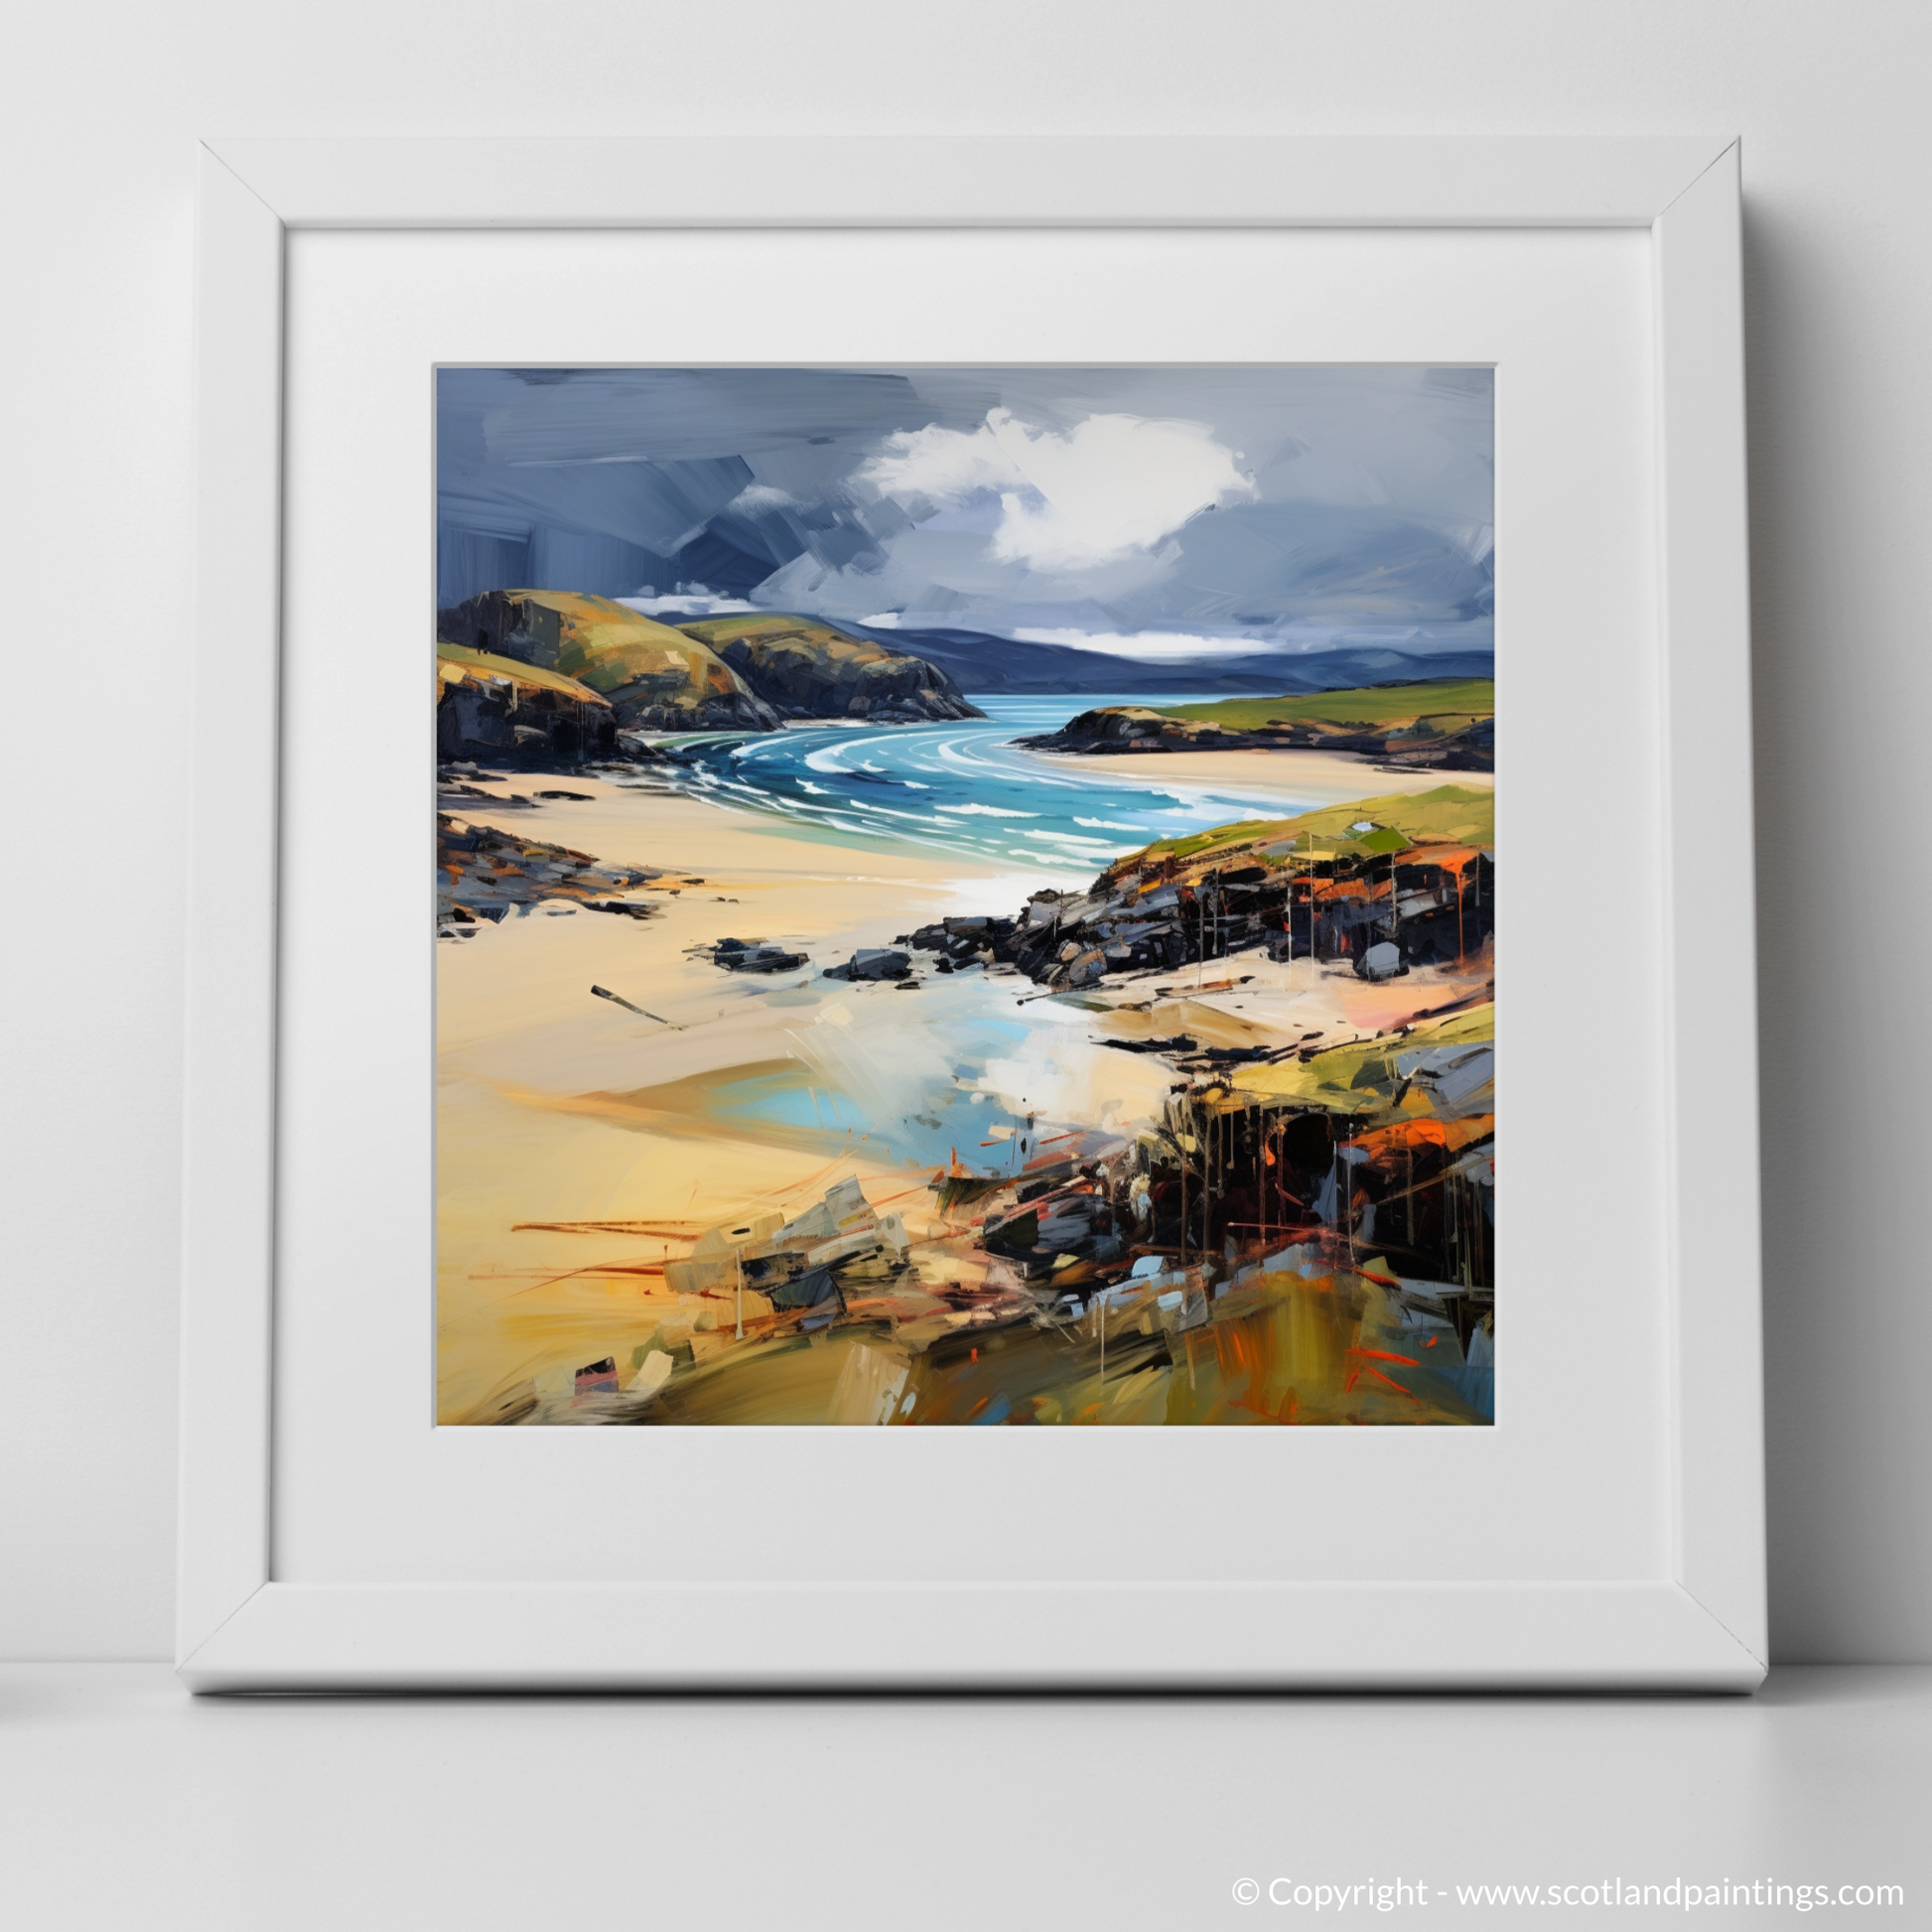 Art Print of Balnakeil Bay, Durness, Sutherland with a white frame